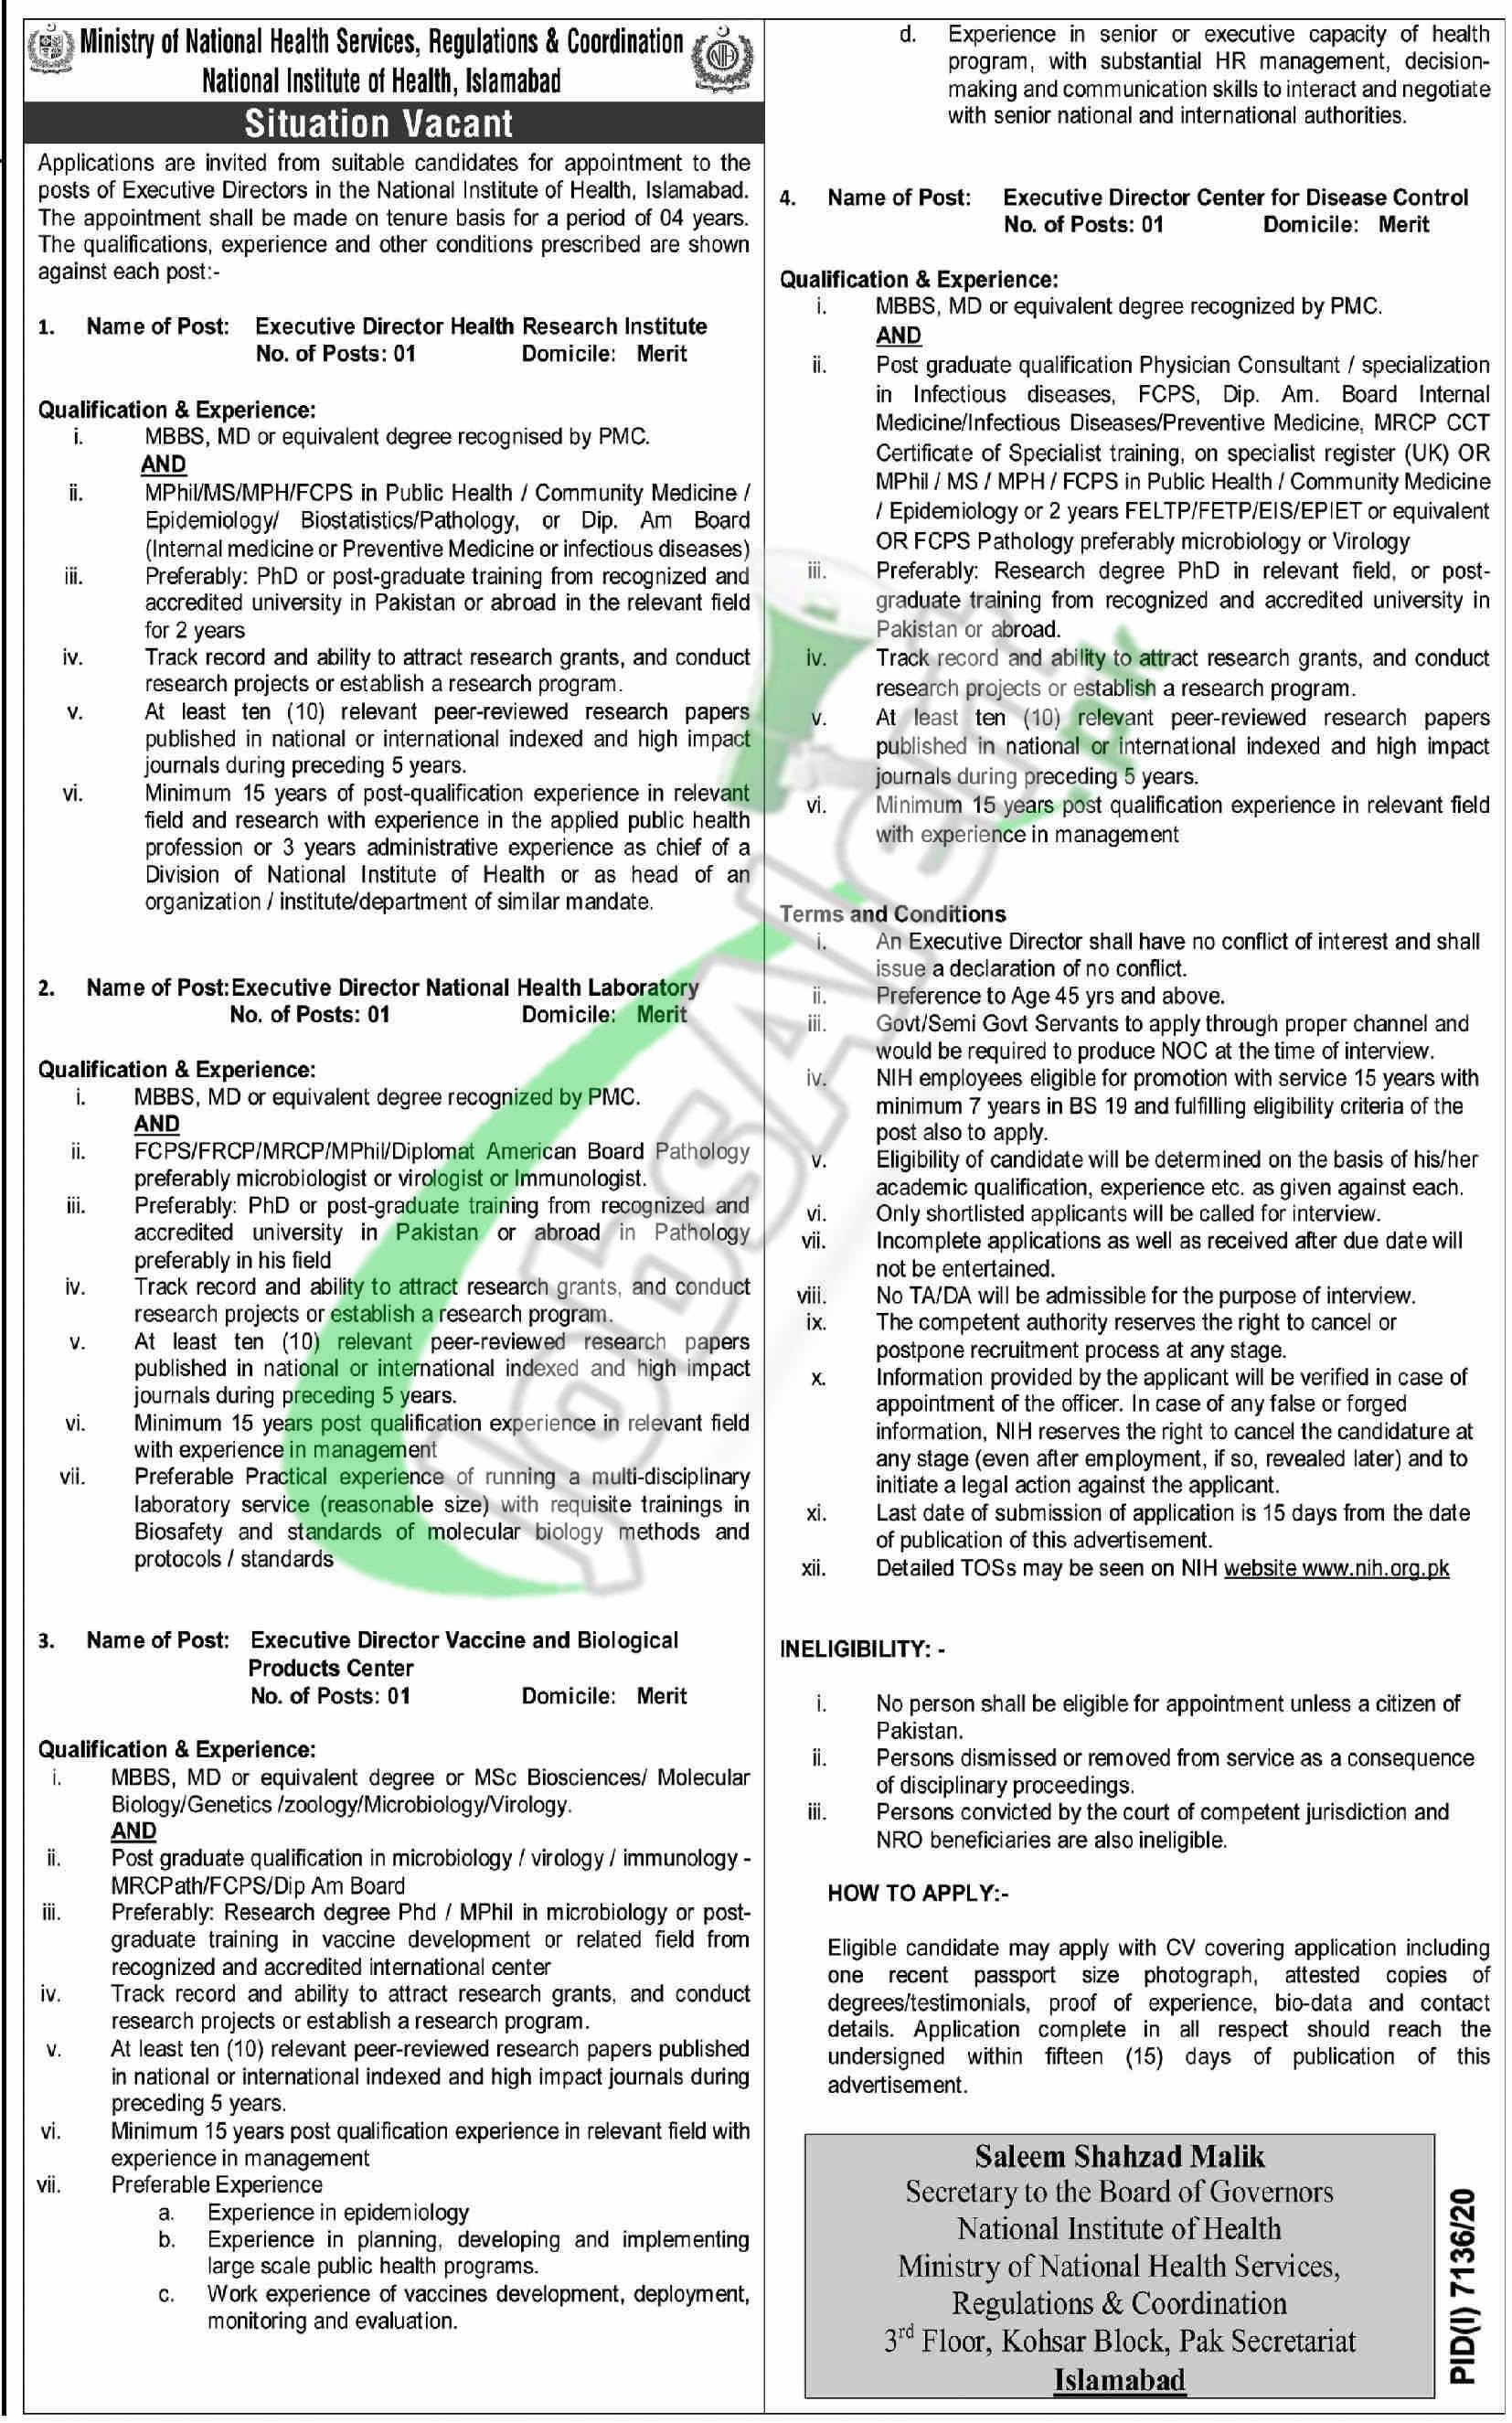 Ministry of National Health Services Regulations & Coordination Jobs 2021 Latest